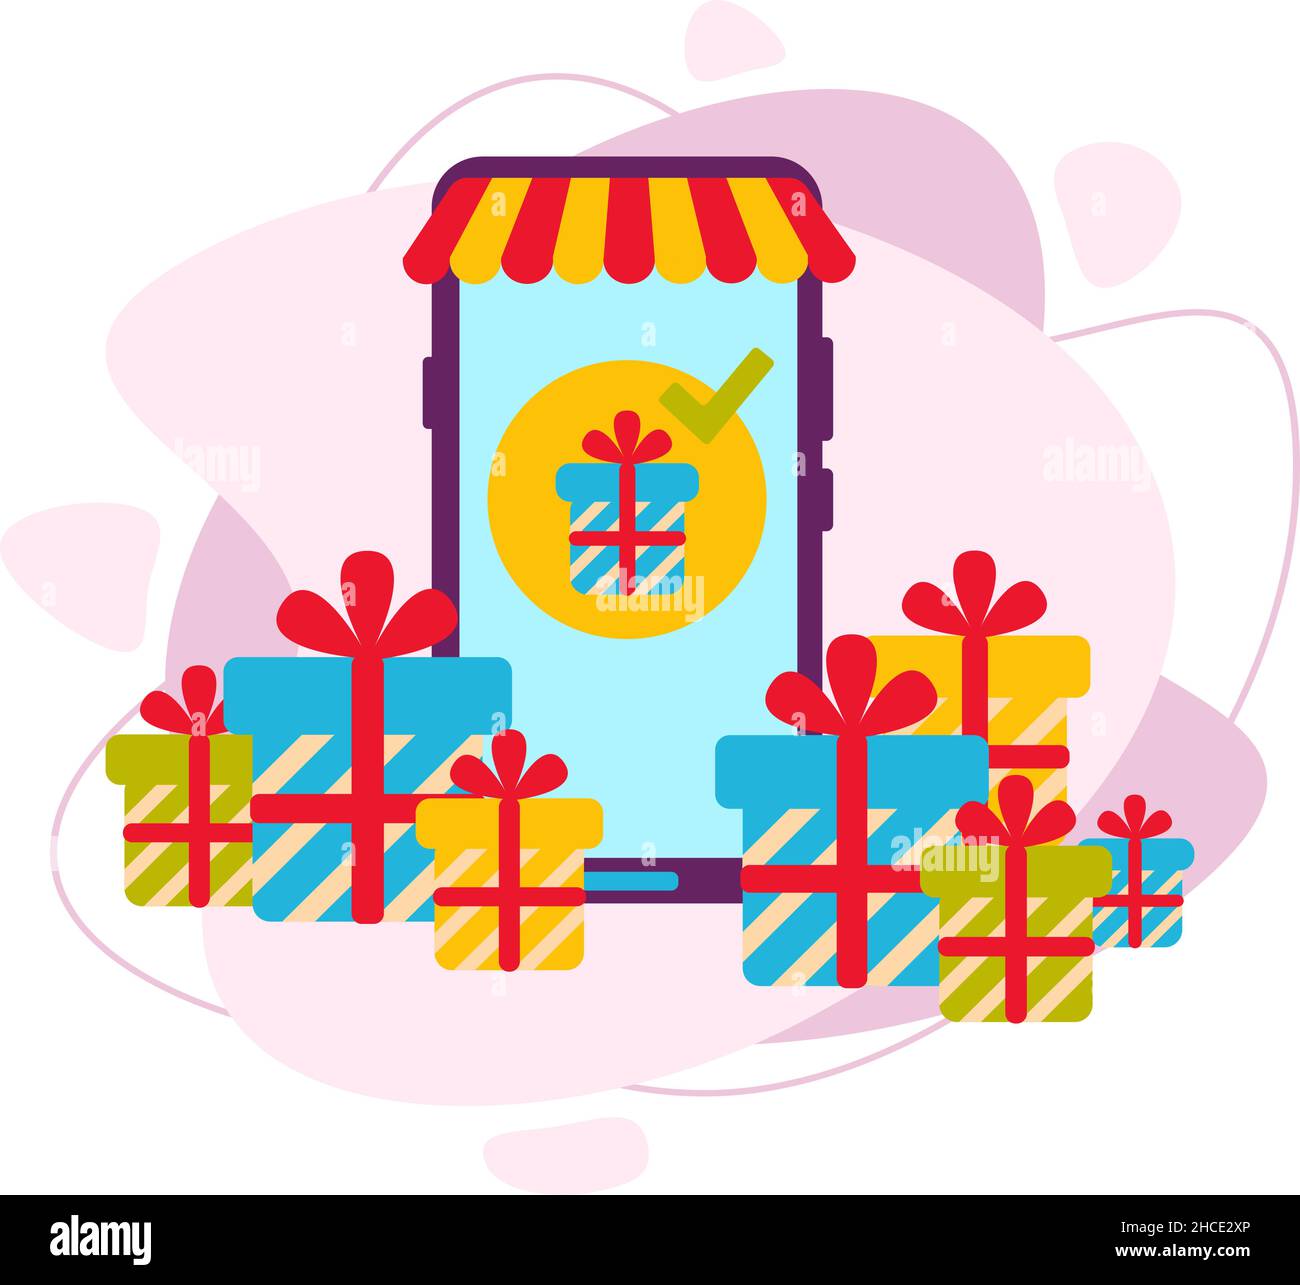 Illustration of a mobile online store. Buying gifts for the holiday. Stock Vector